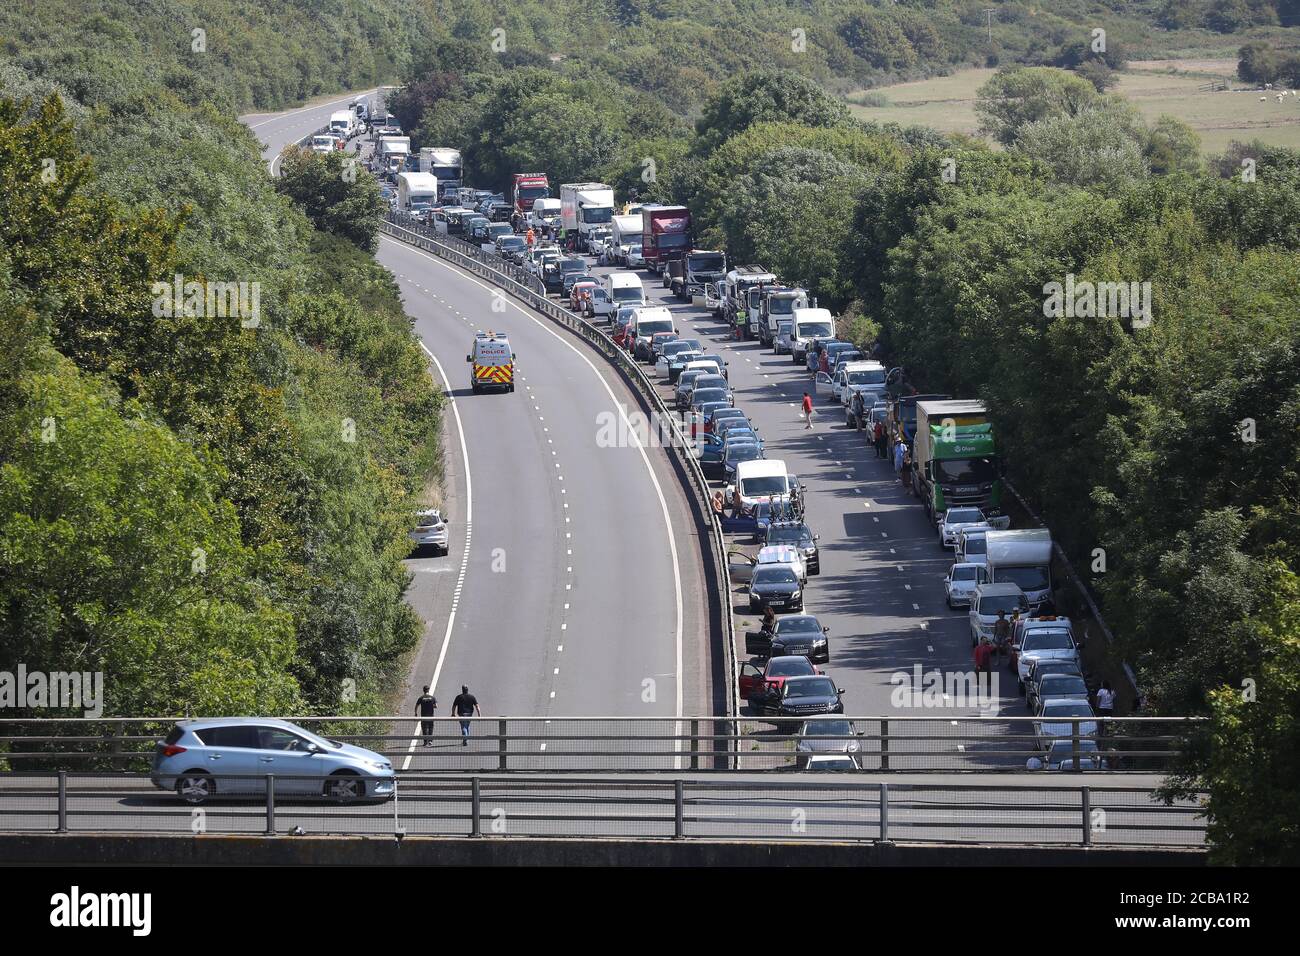 Lewes, UK. 10 August  2020 Traffic queues on the A27 West Bound carriageway after a major road traffic collision involving a  HGV and a Geoamey Prisoner transport Vehicle on the A27 Lewes bypass Credit: James Boardman / Alamy Live News Stock Photo